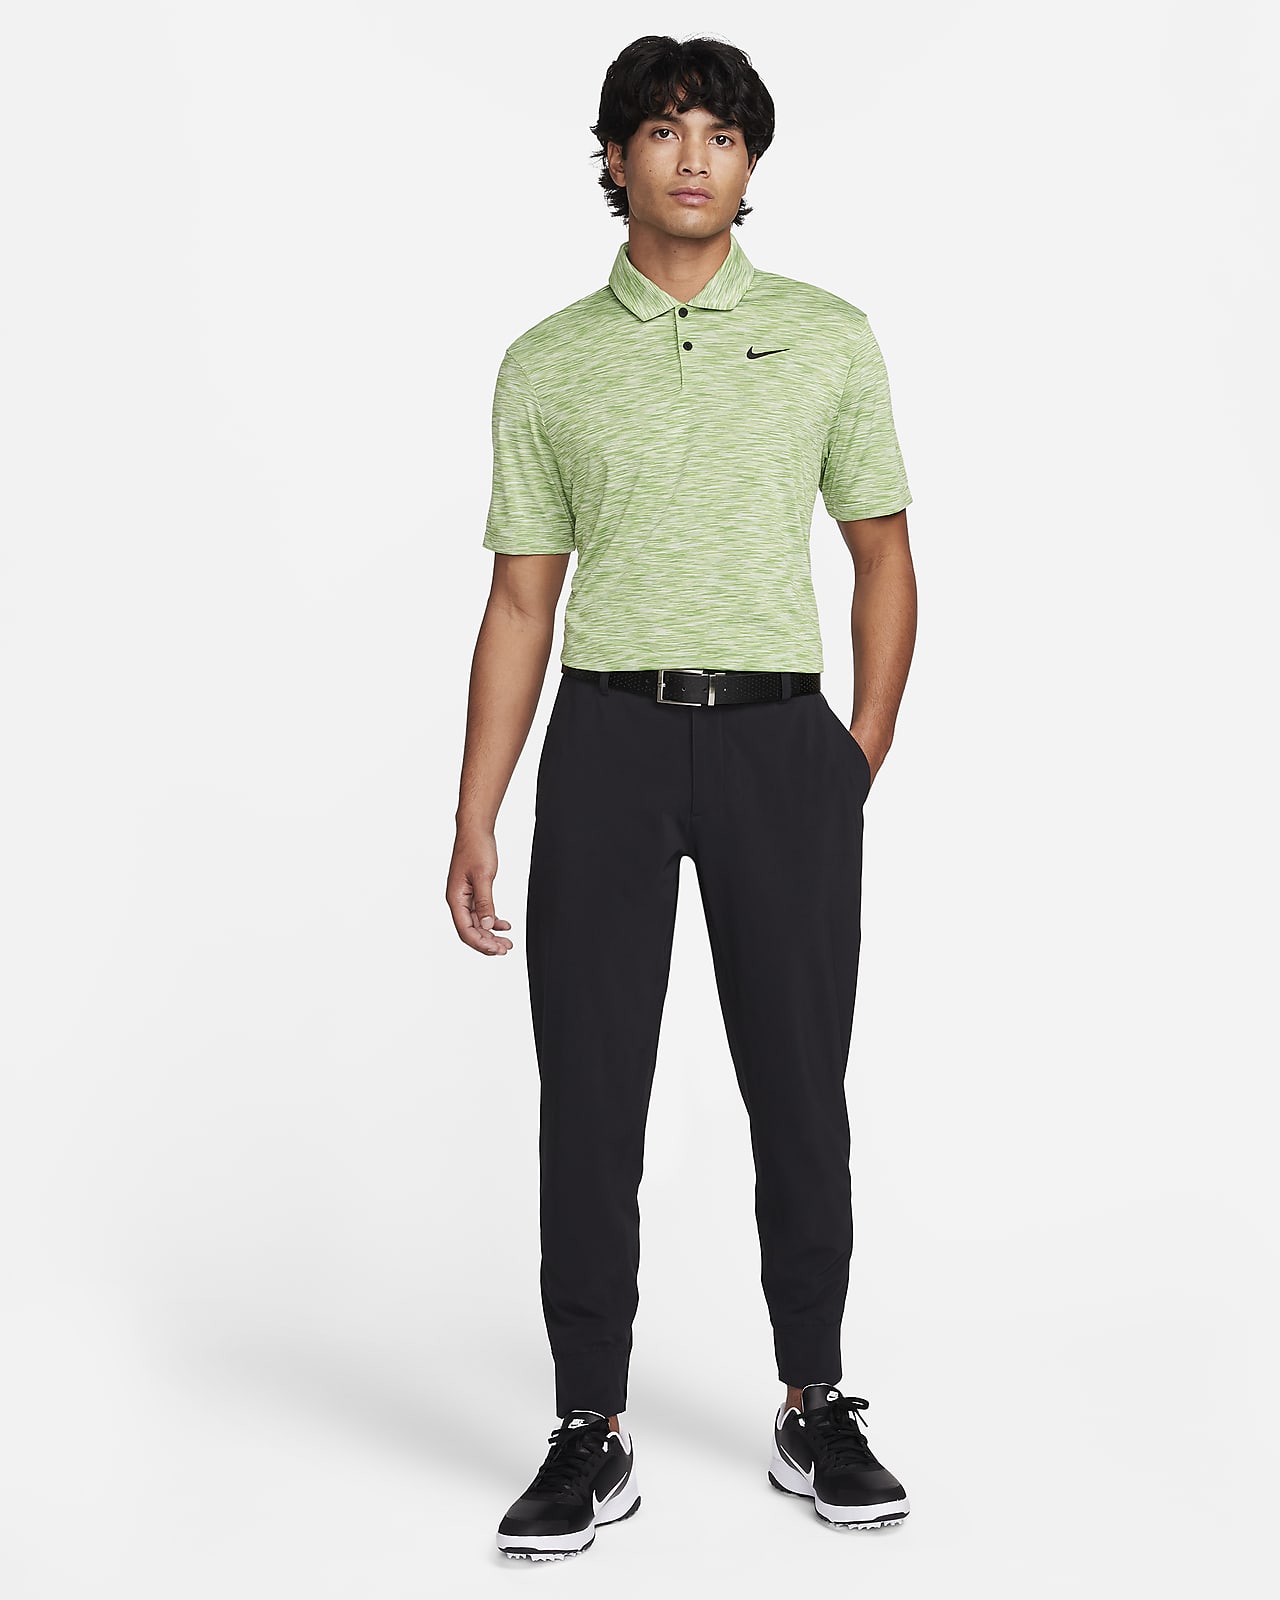 Stay Stylish on the Green with Golf Joggers